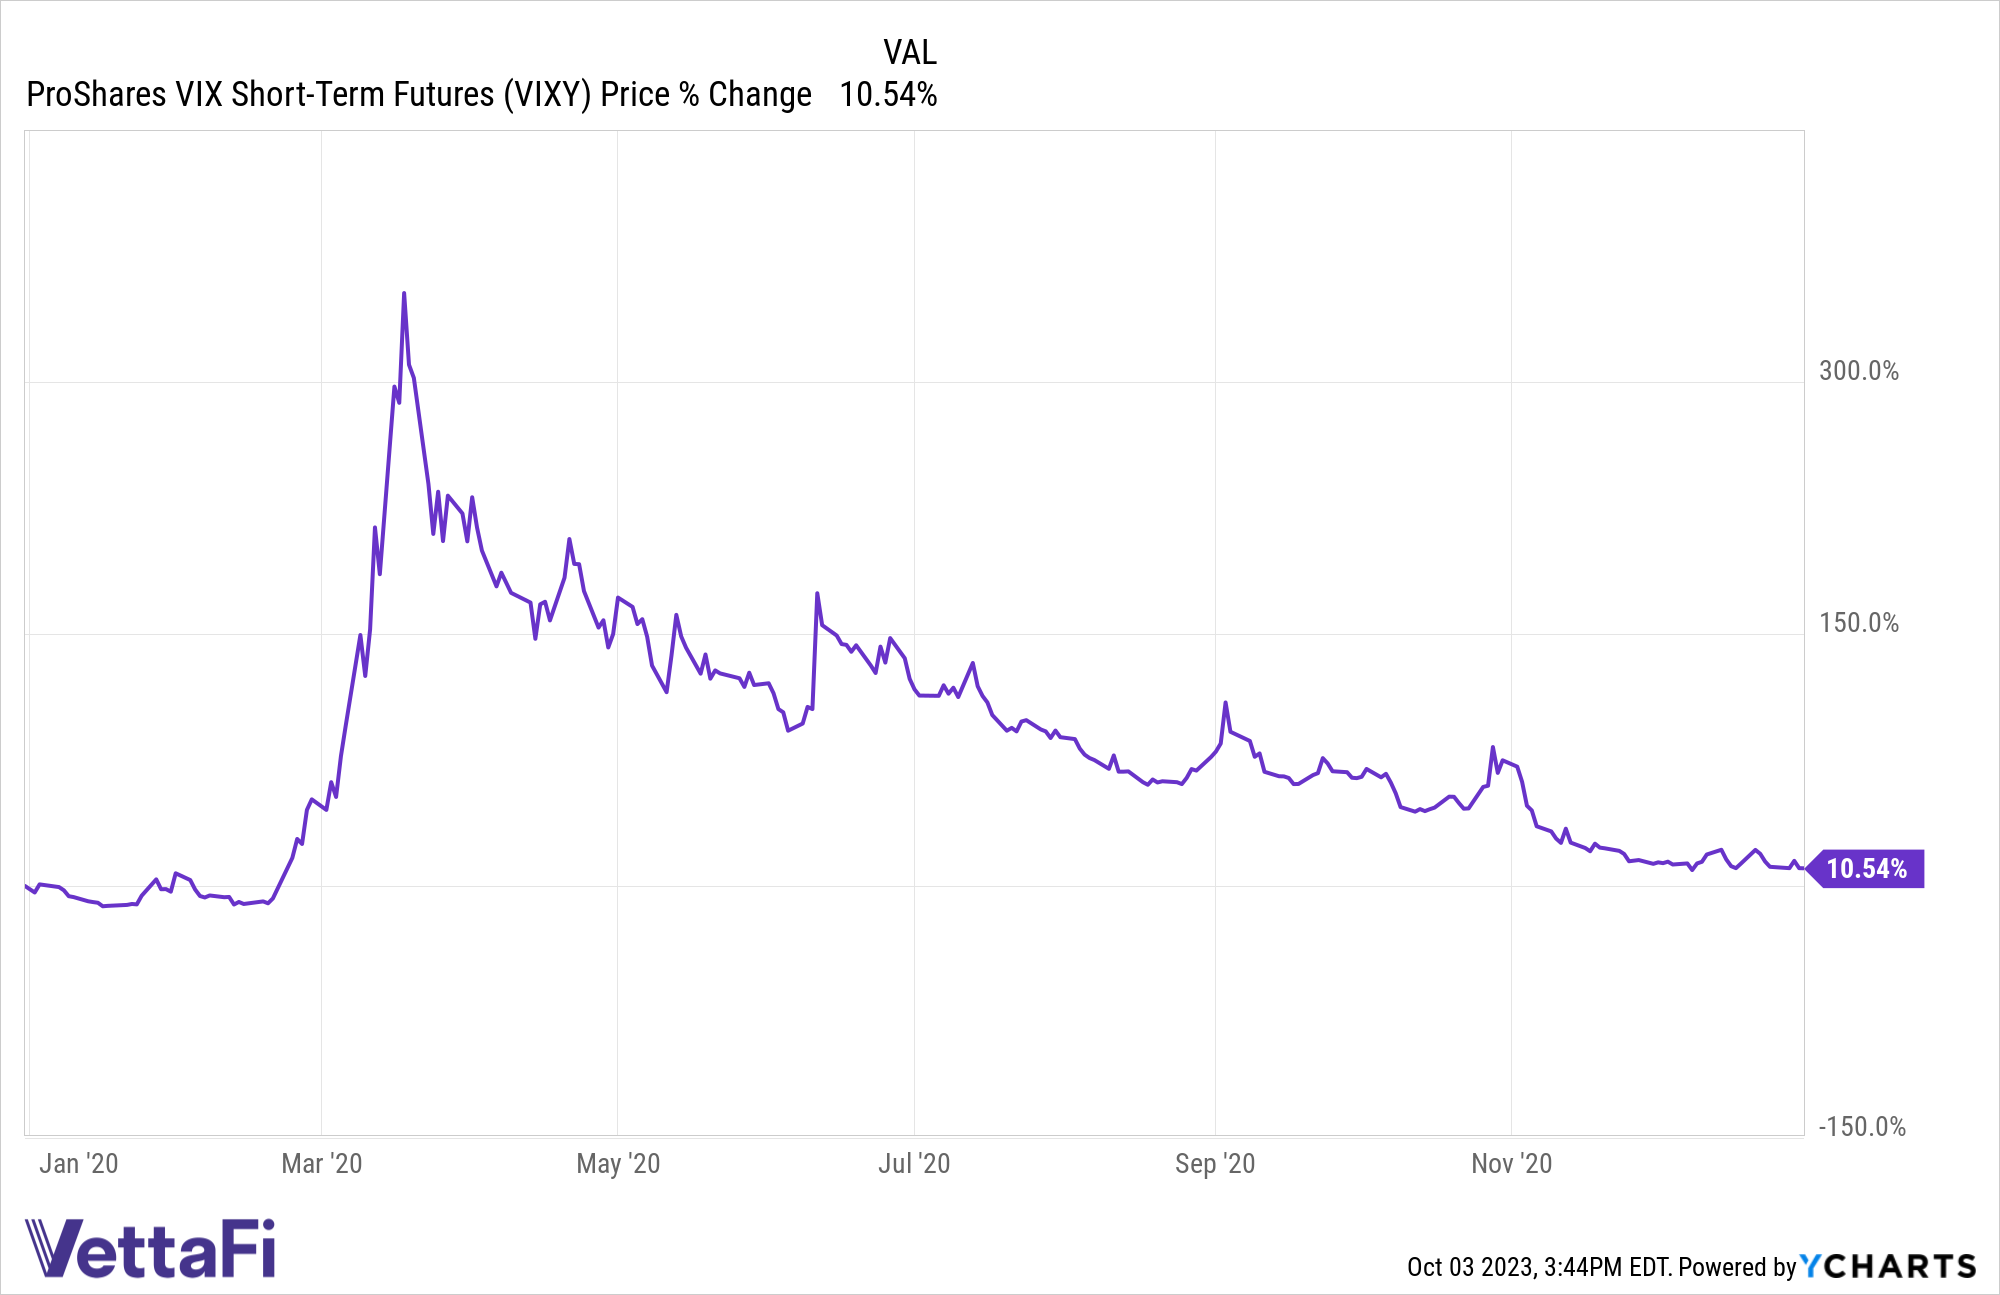 Price percentage change of VIXY between January 1, 2020 and December 31, 2020.